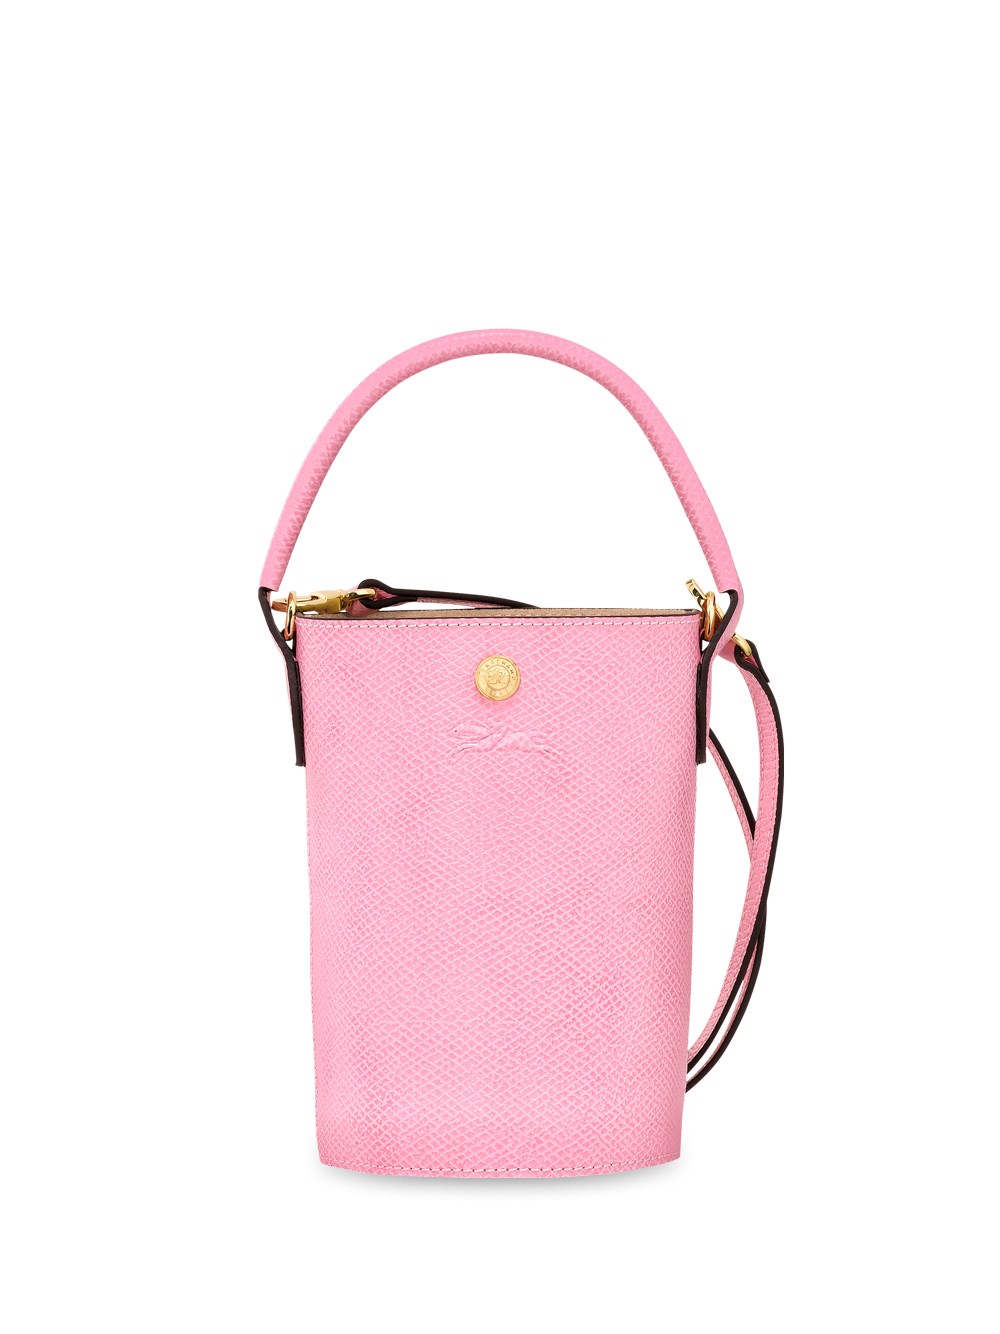 Longchamp `epure` Extra Small Crossbody Bag in Pink